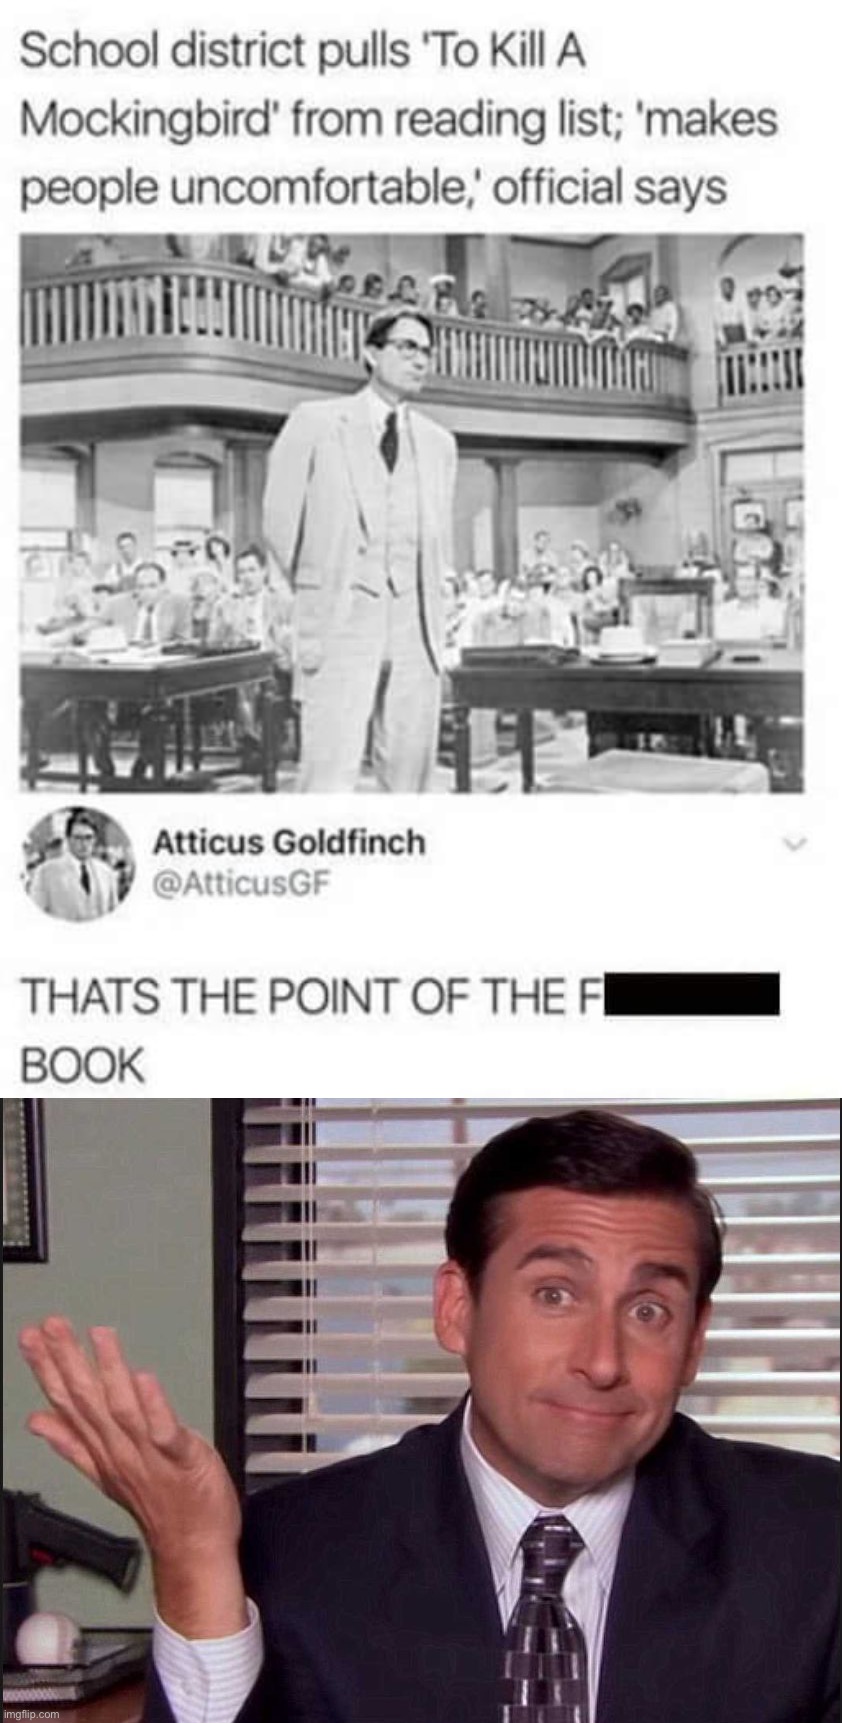 Confronting racism should make you uncomfortable. | image tagged in to kill a mockingbird makes people uncomfortable,michael scott,racism,to kill a mockingbird,racists,white people | made w/ Imgflip meme maker